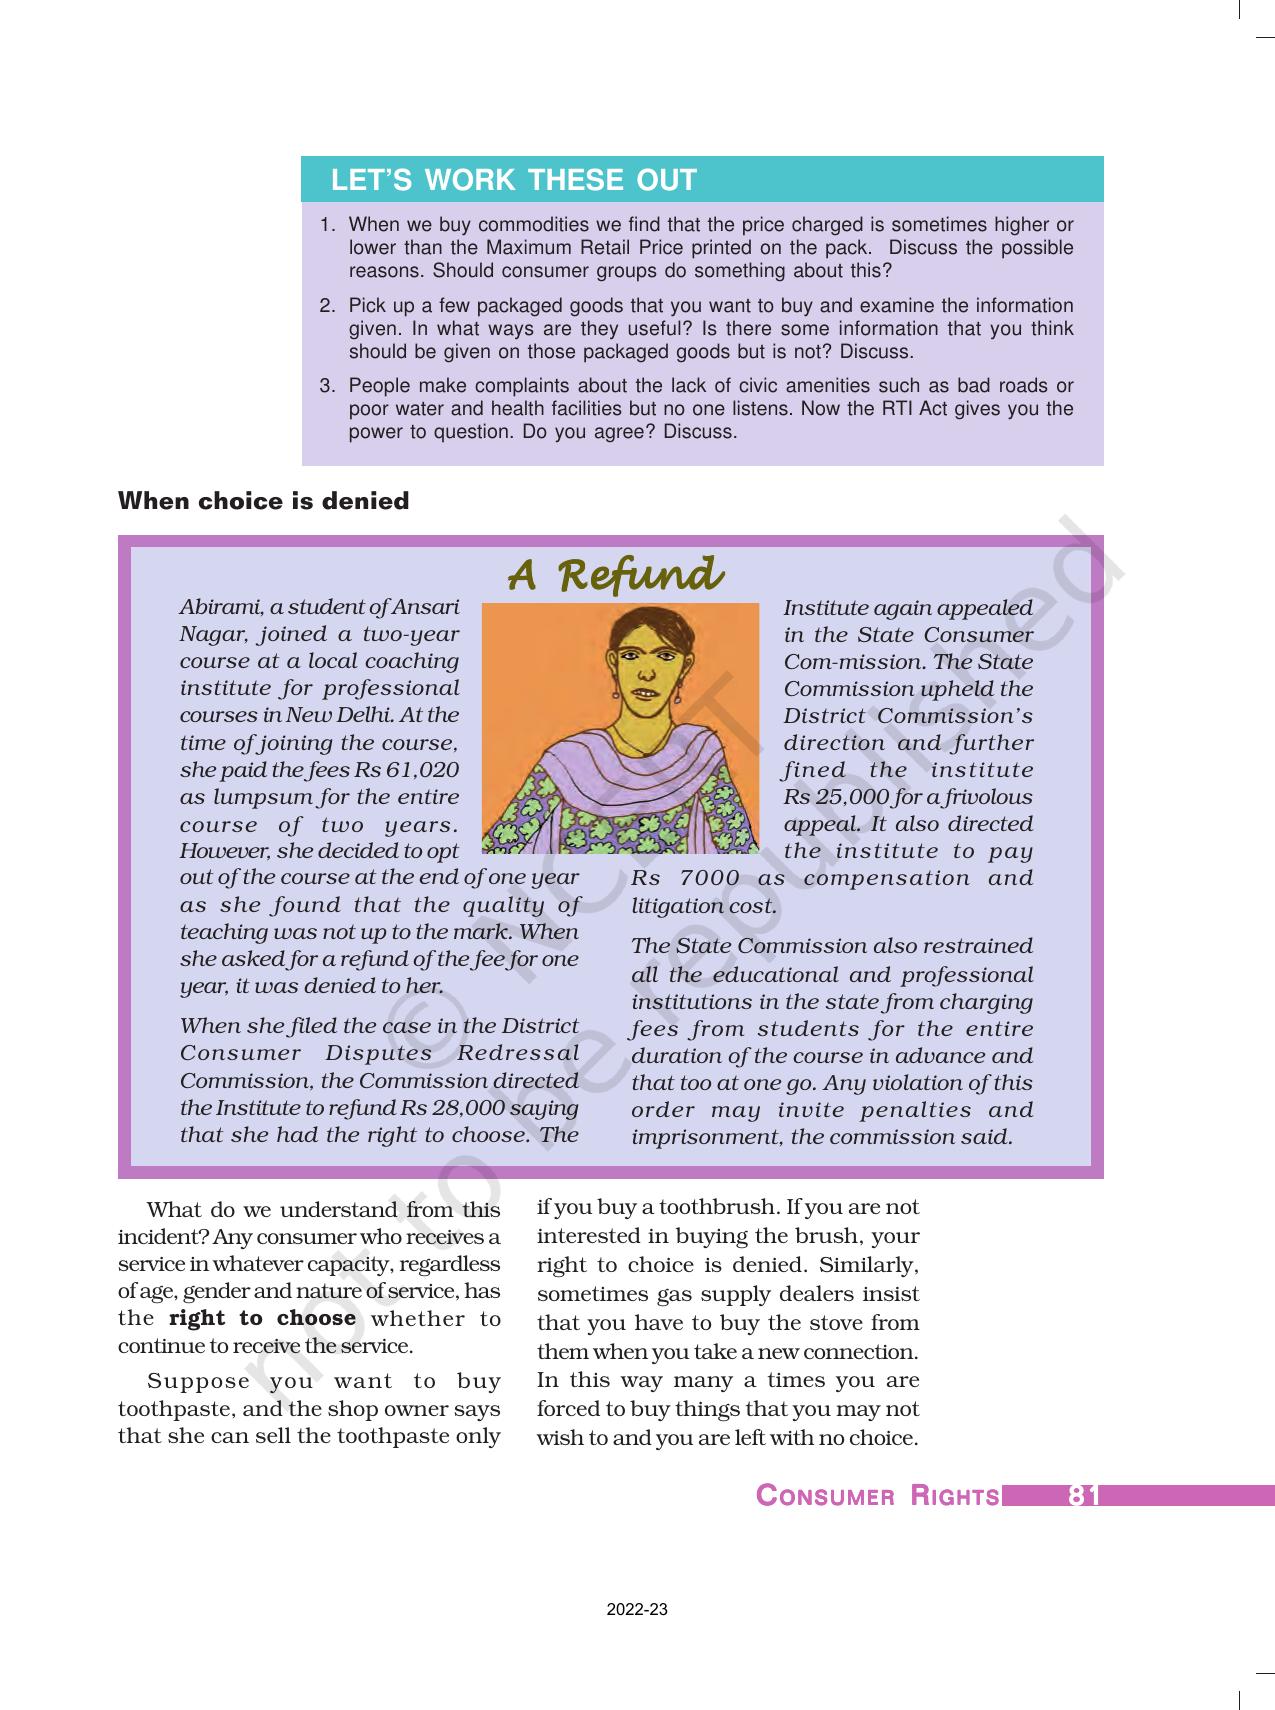 NCERT Book for Class 10 Economics Chapter 5 Consumer Rights - Page 8